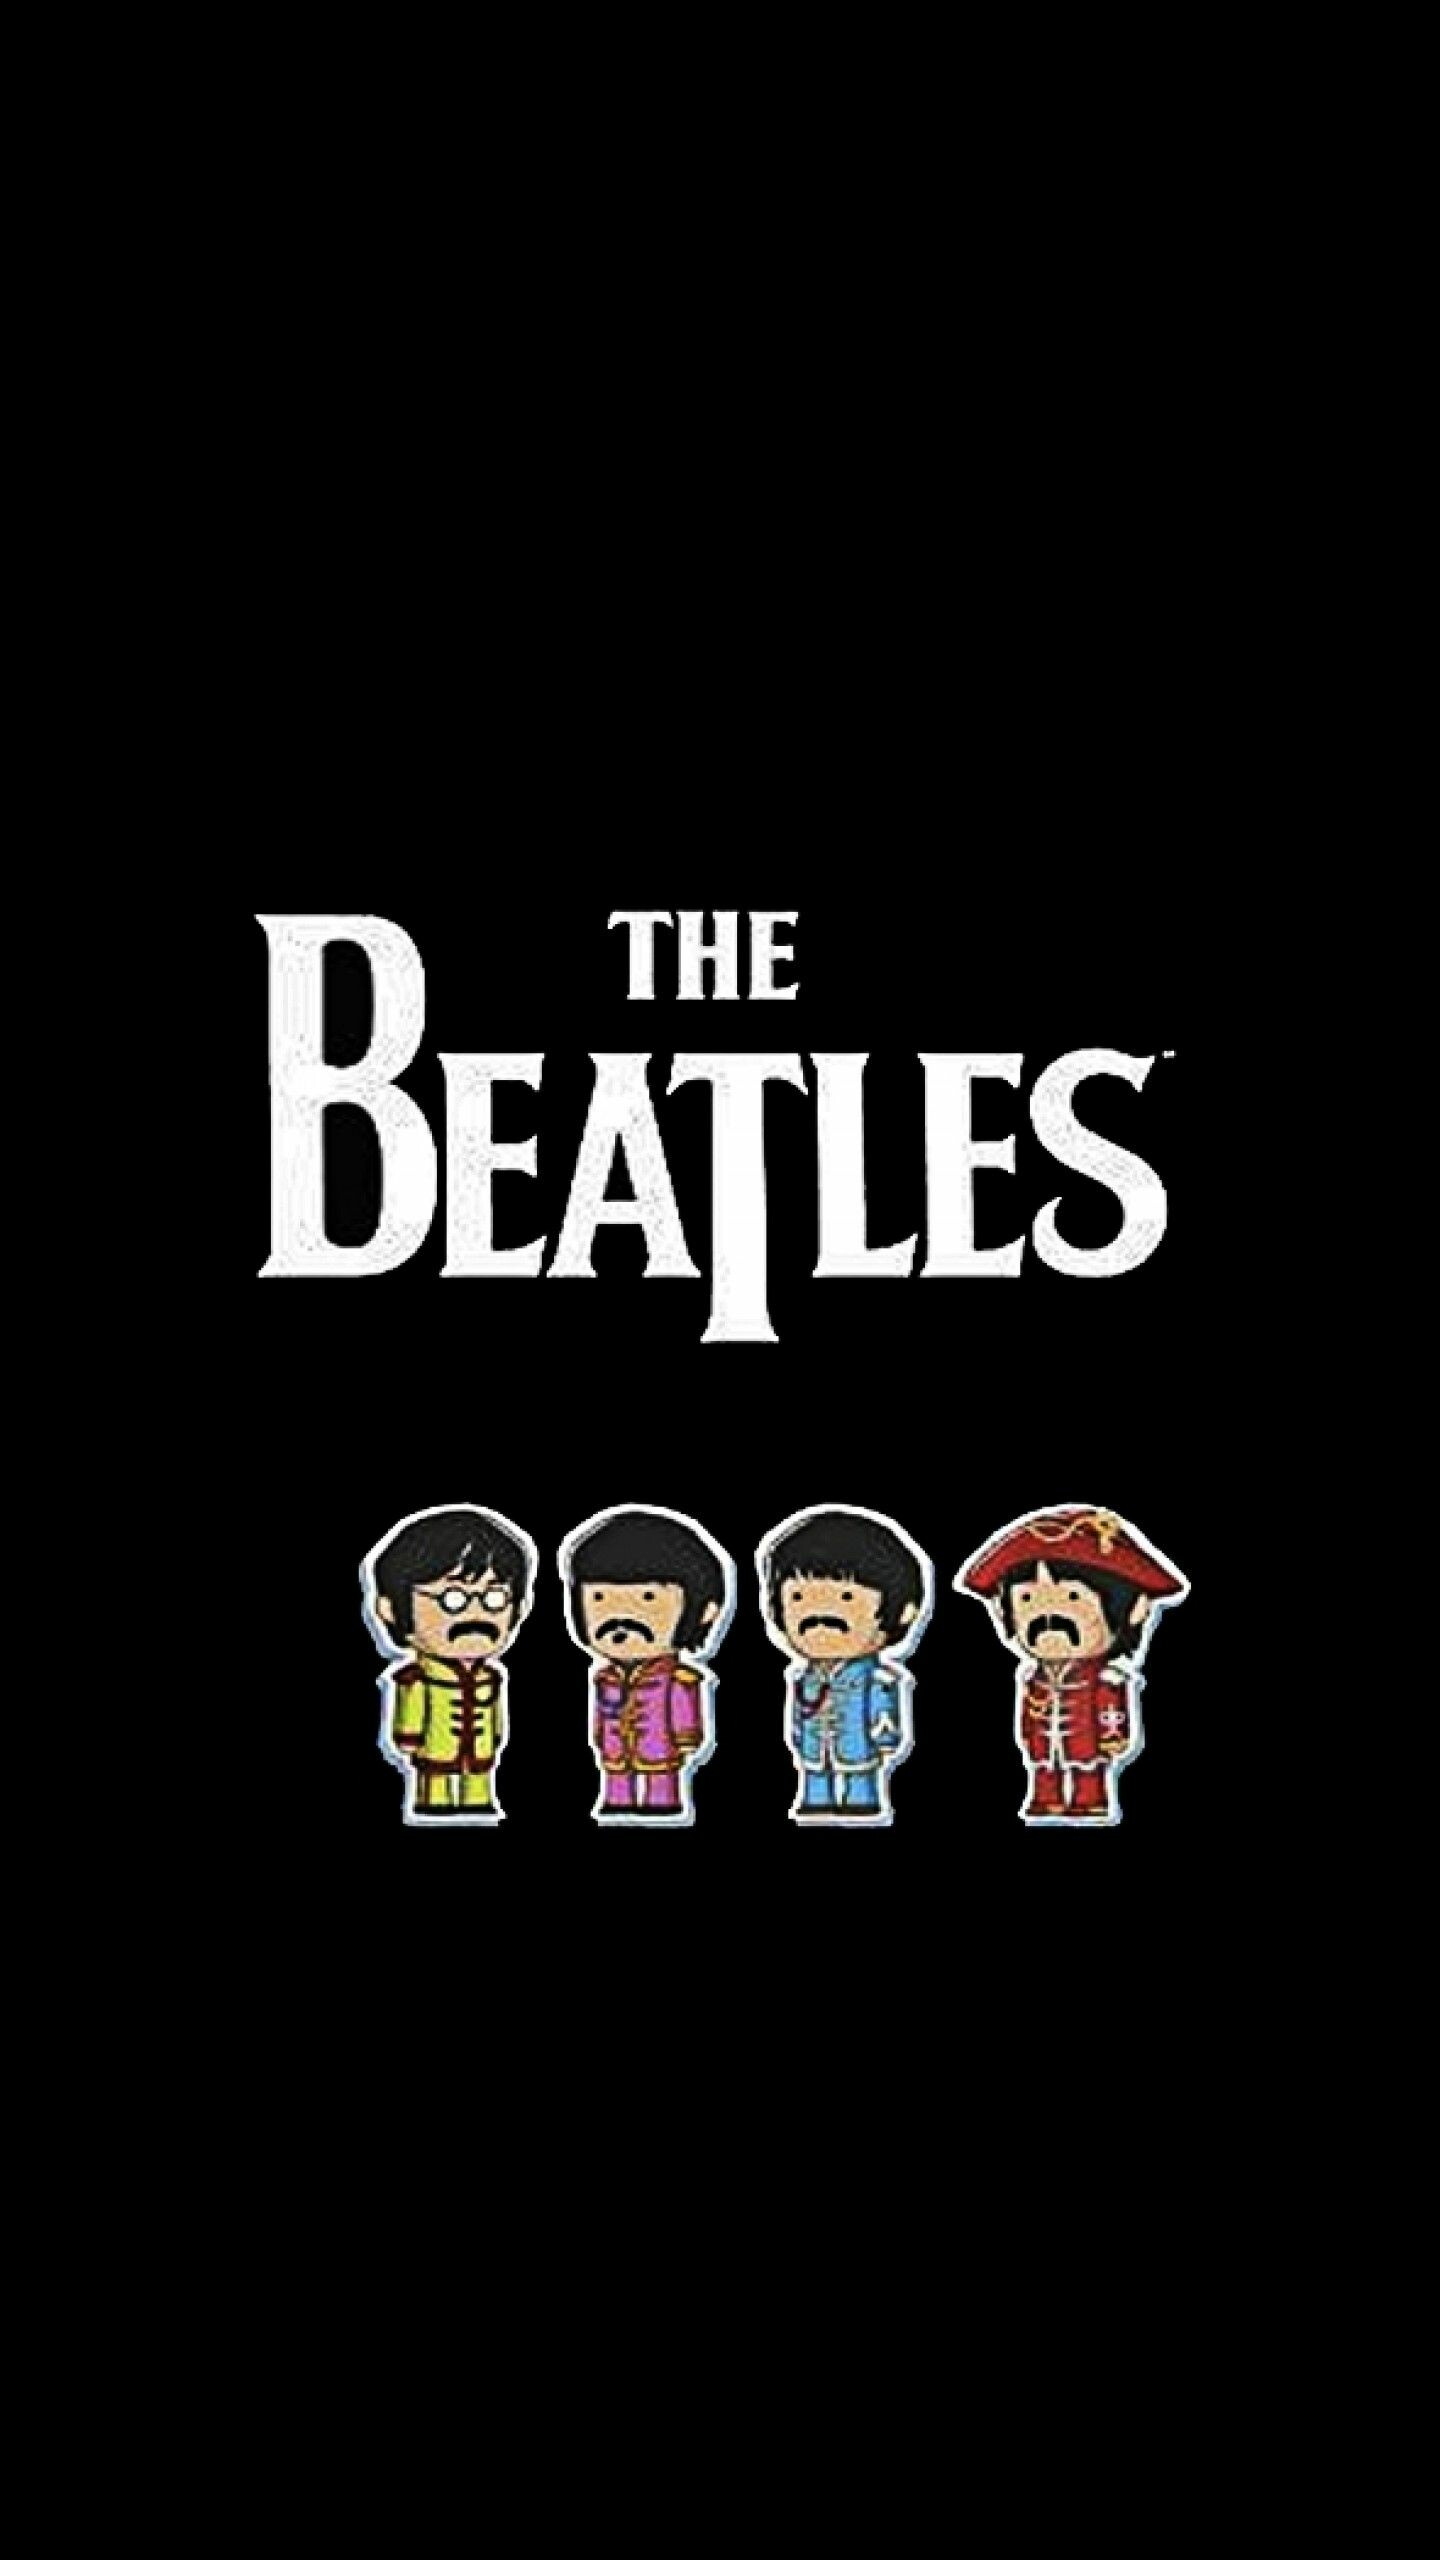 The Beatles: "Love Me Do" was the official debut single by the band. 1440x2560 HD Wallpaper.